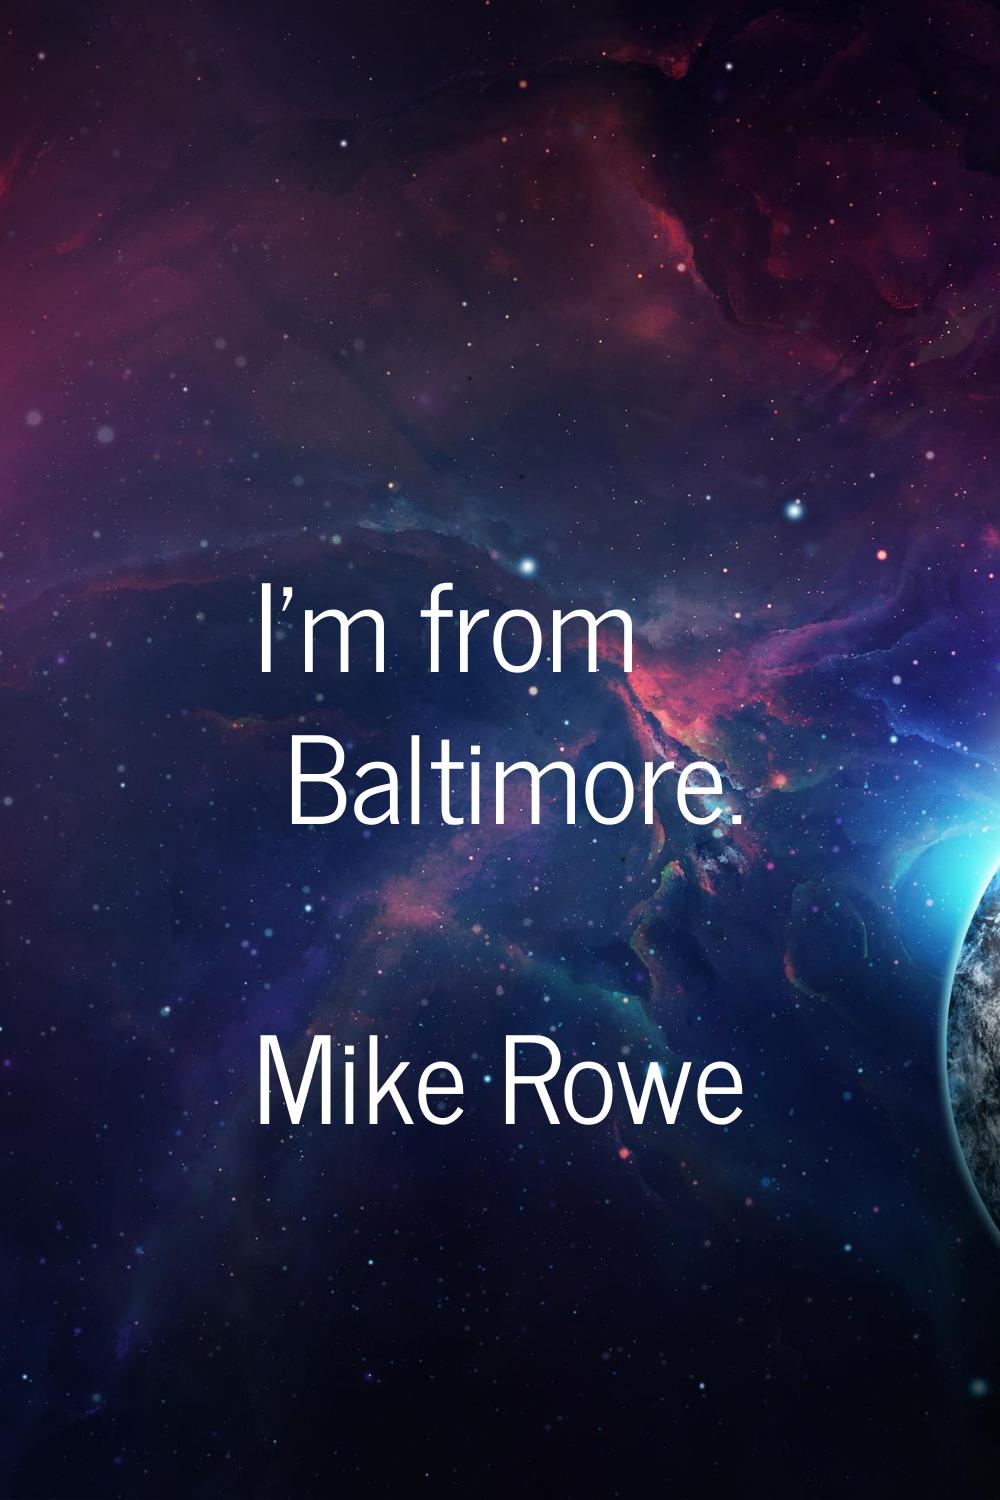 I'm from Baltimore.